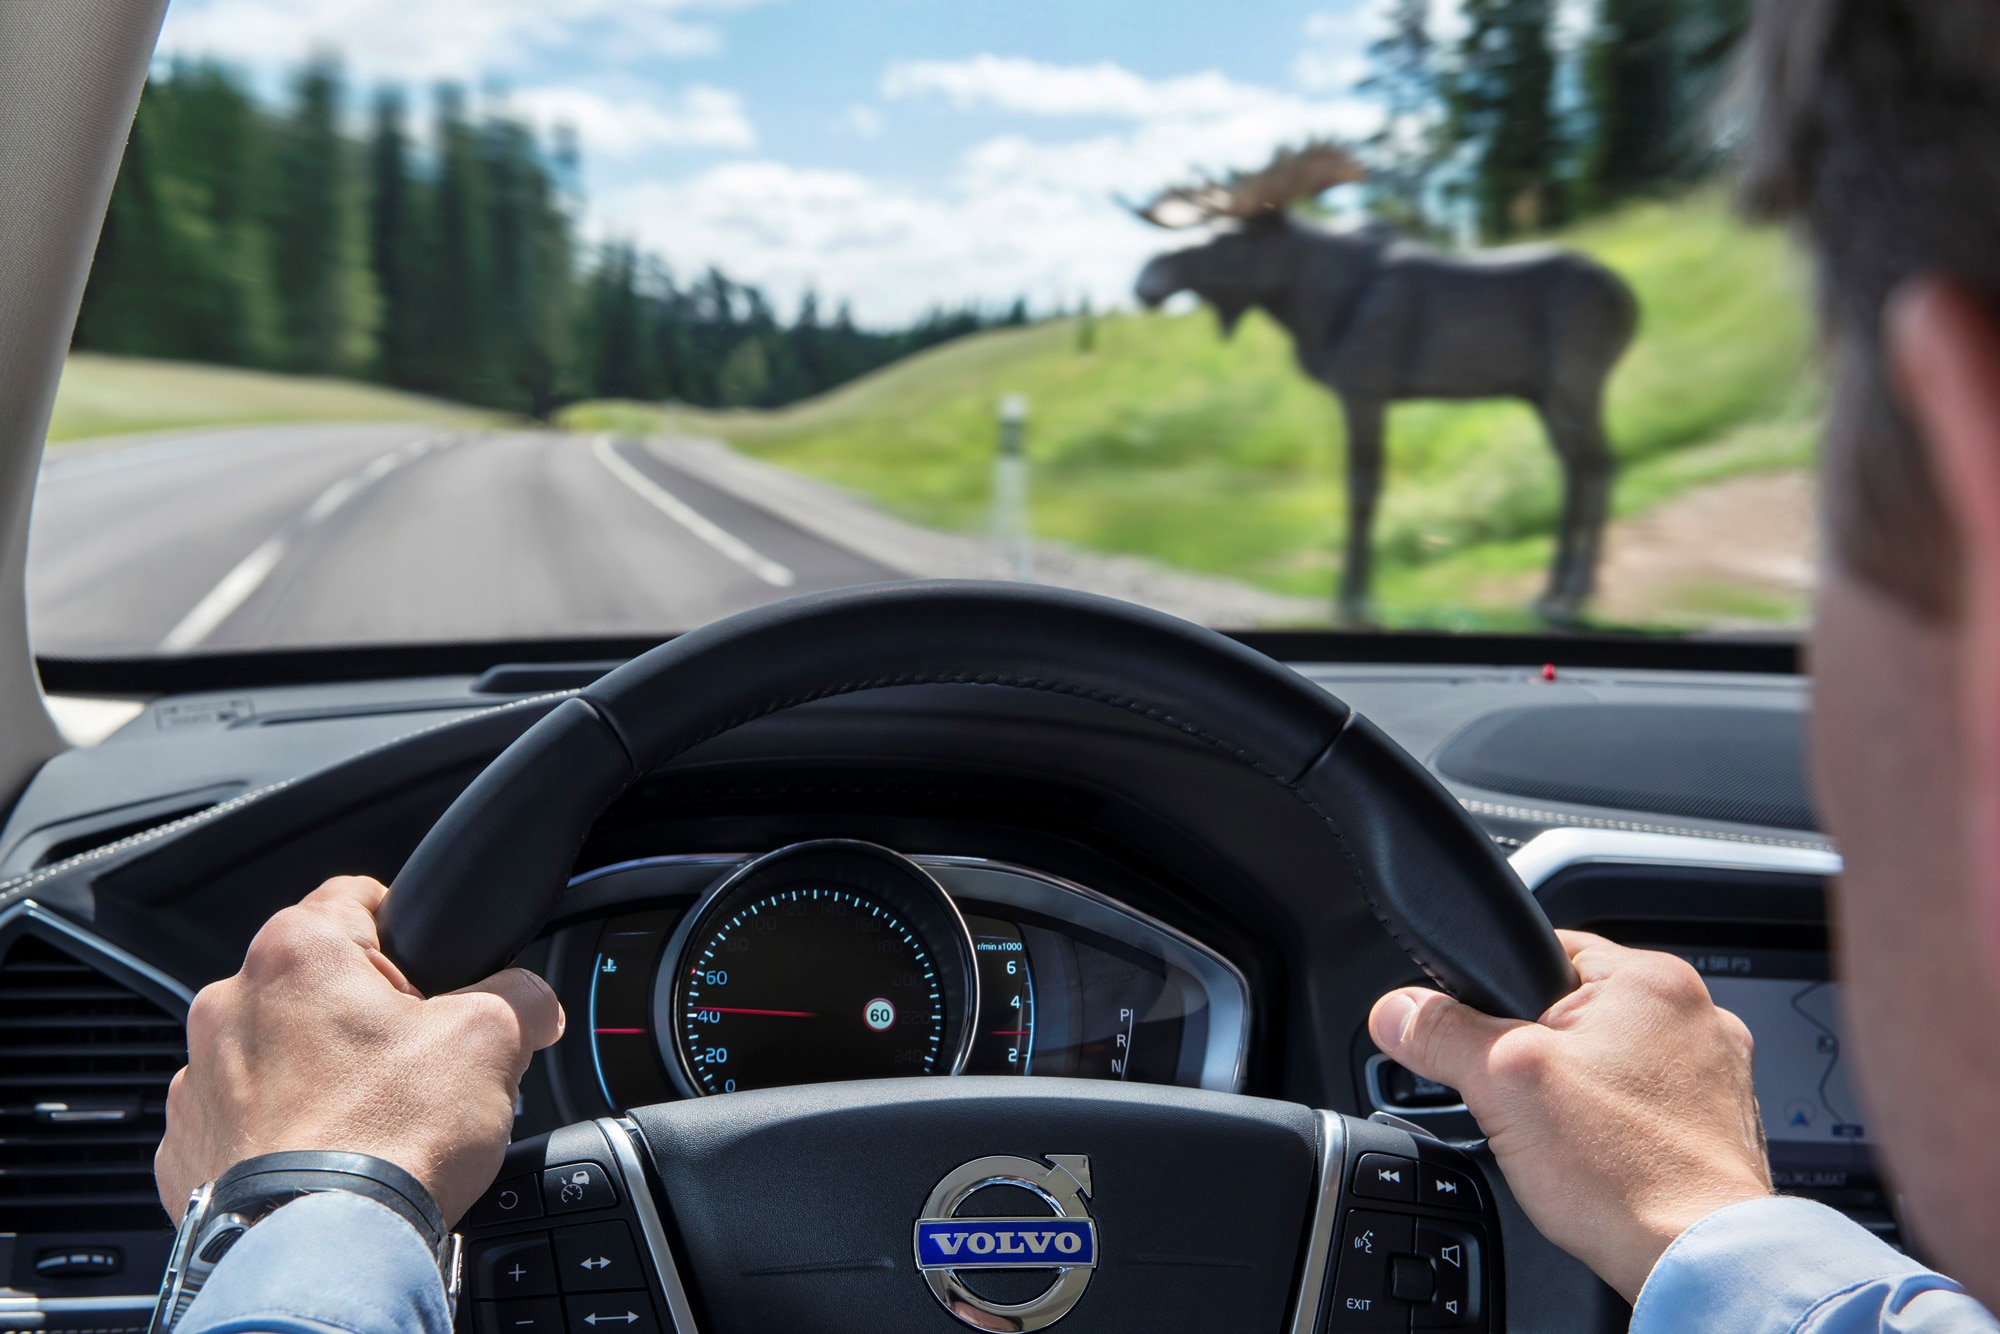 Volvo puts a car through the moose test at its private testing facility